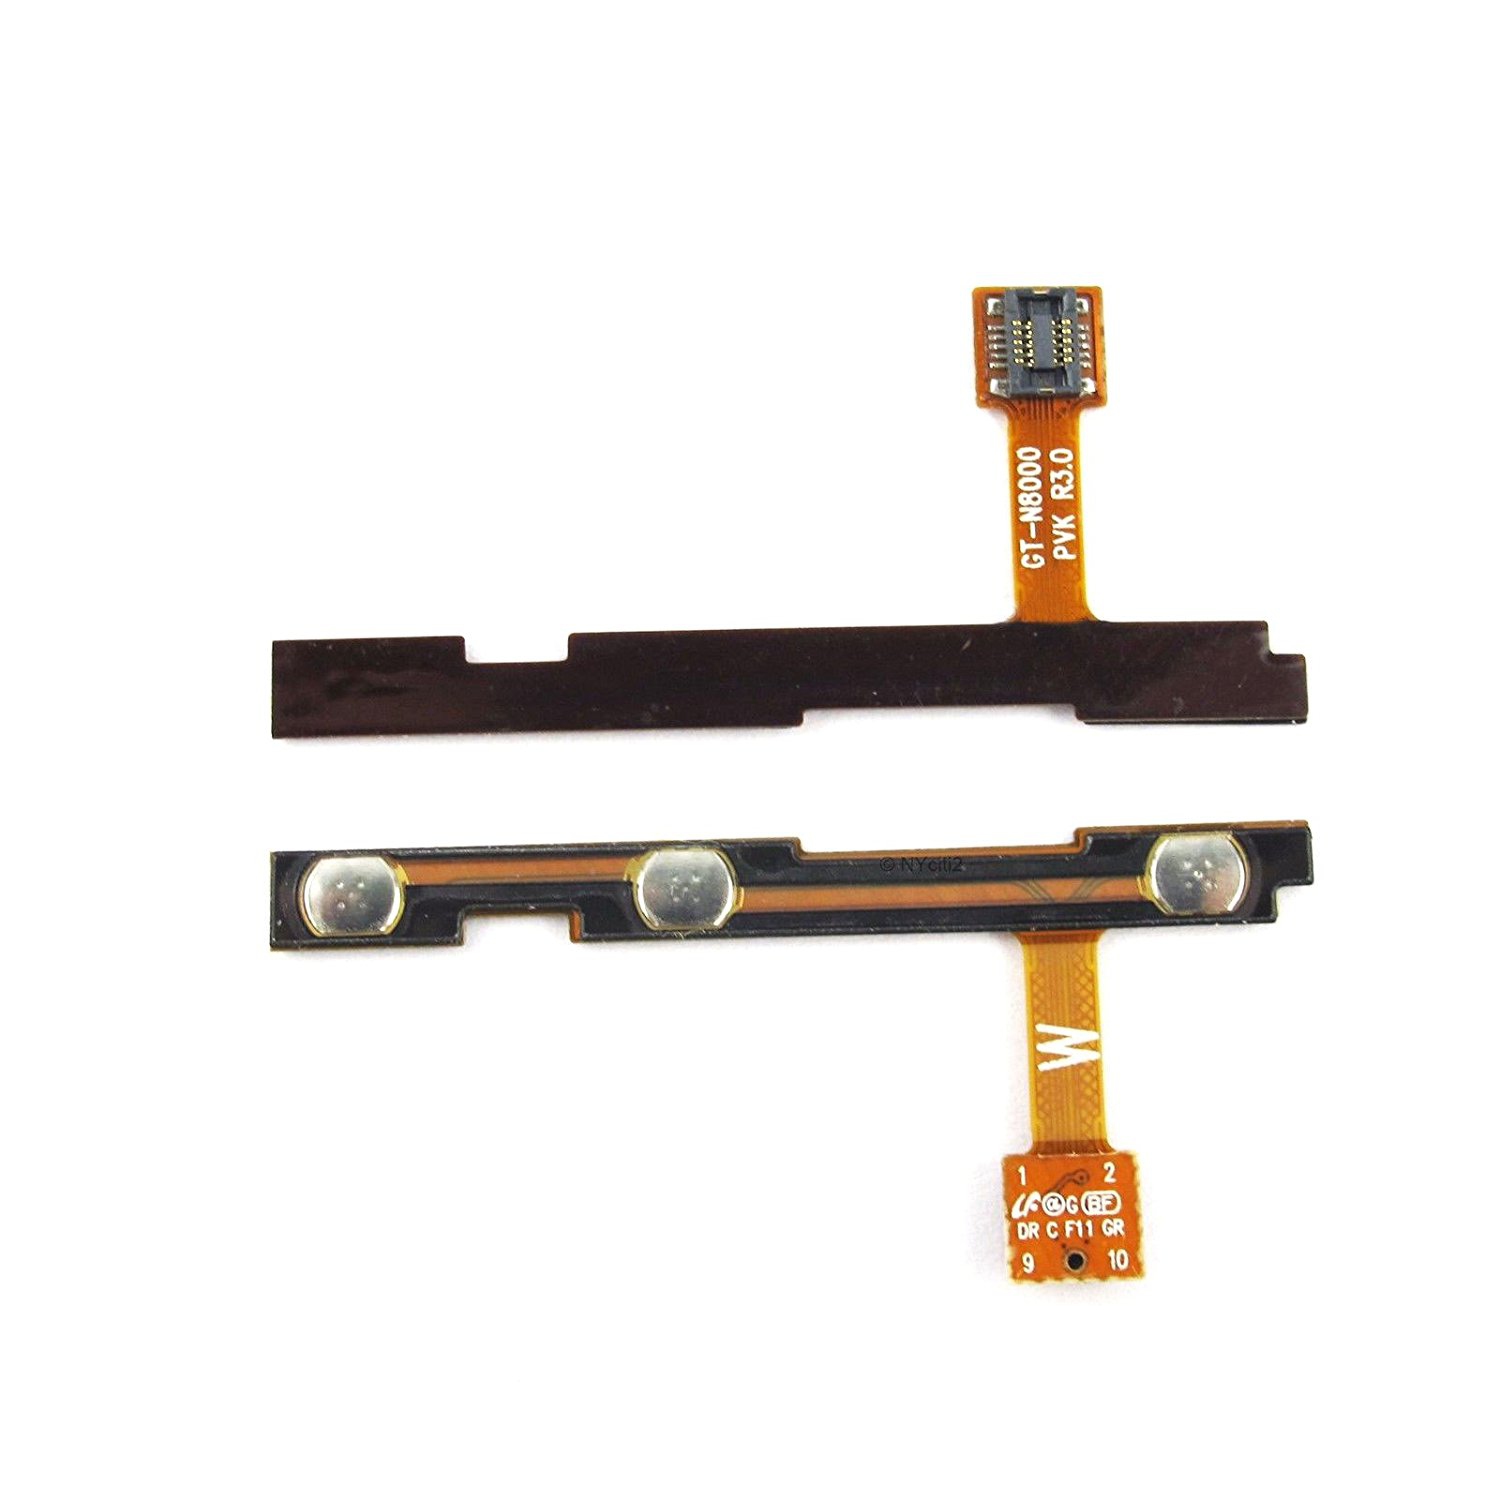 Samsung Galaxy Note 10.1 N8000 N8010 Tablet Power and Volume Flex Cable